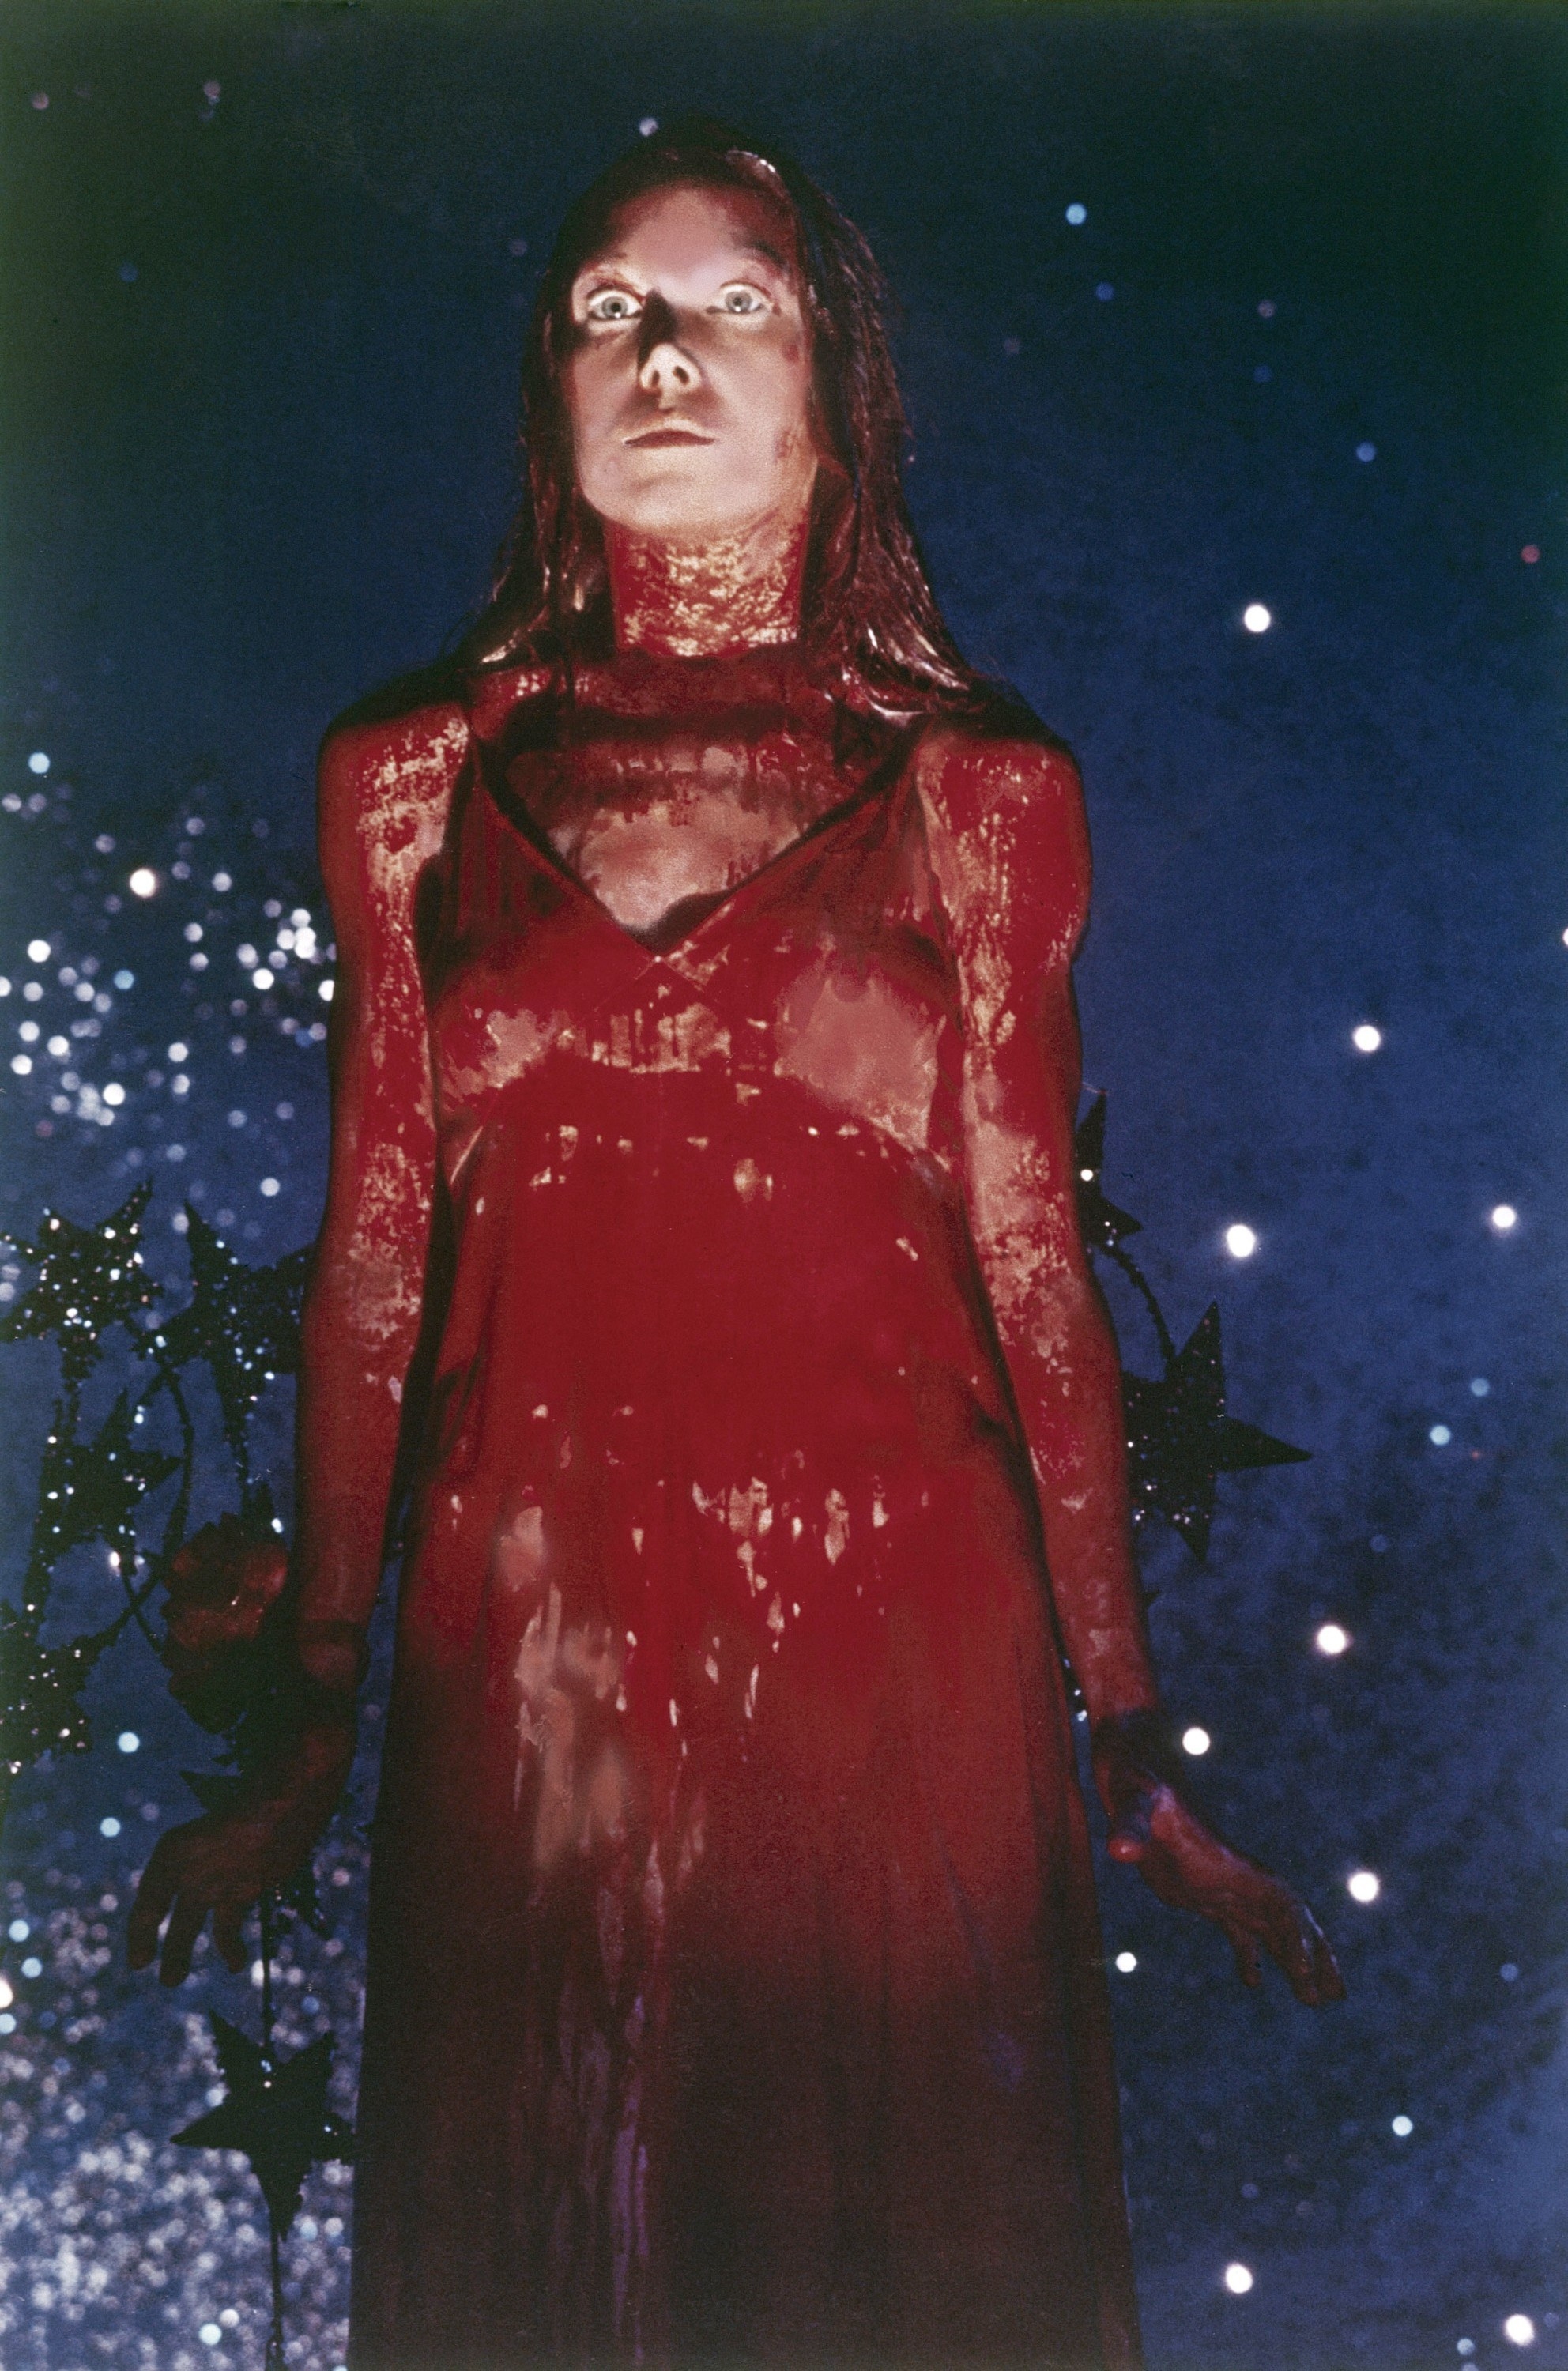 Carrie drenched in blood